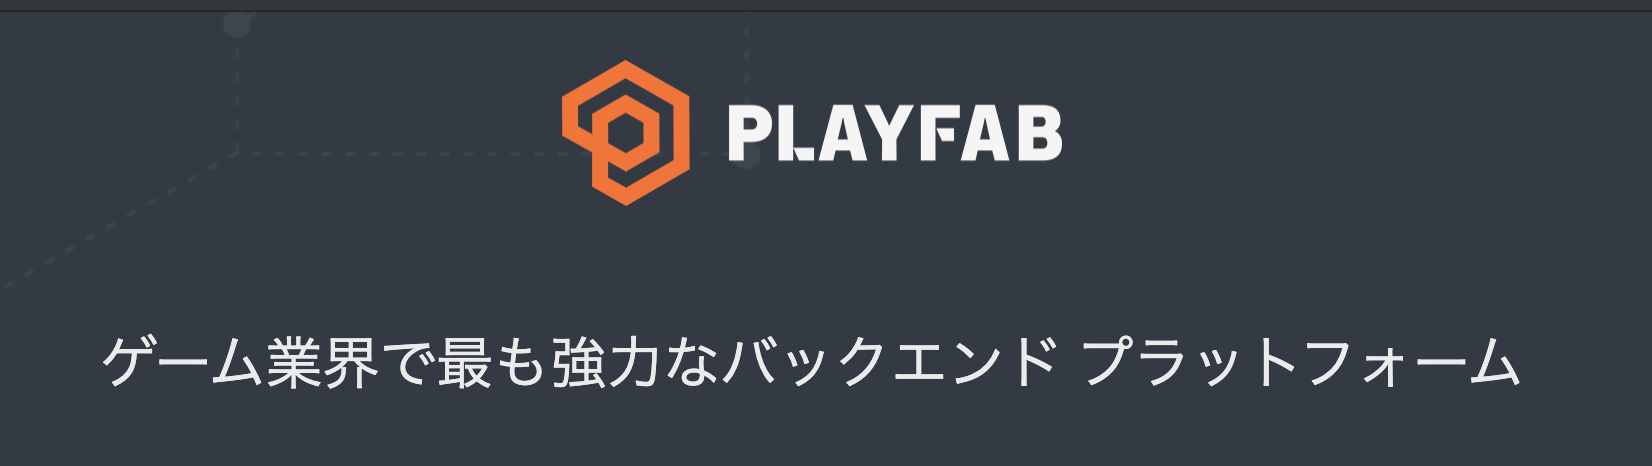 playfab-official